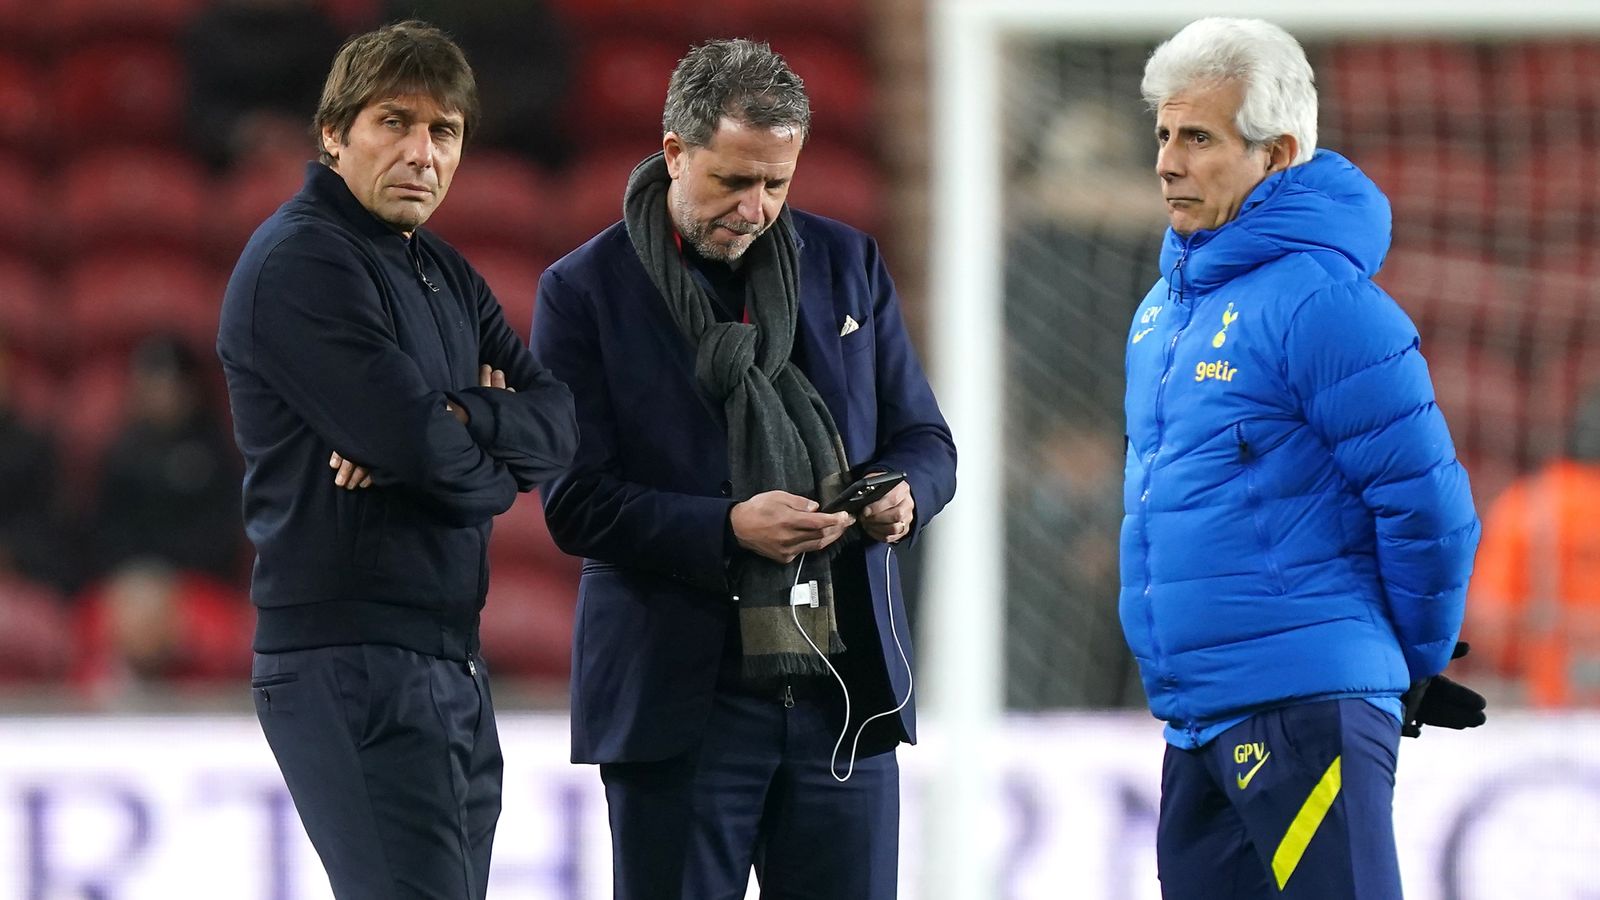 Antonio Conte says Tottenham players and staff are devastated by the death of fitness coach Gian Piero Ventrone